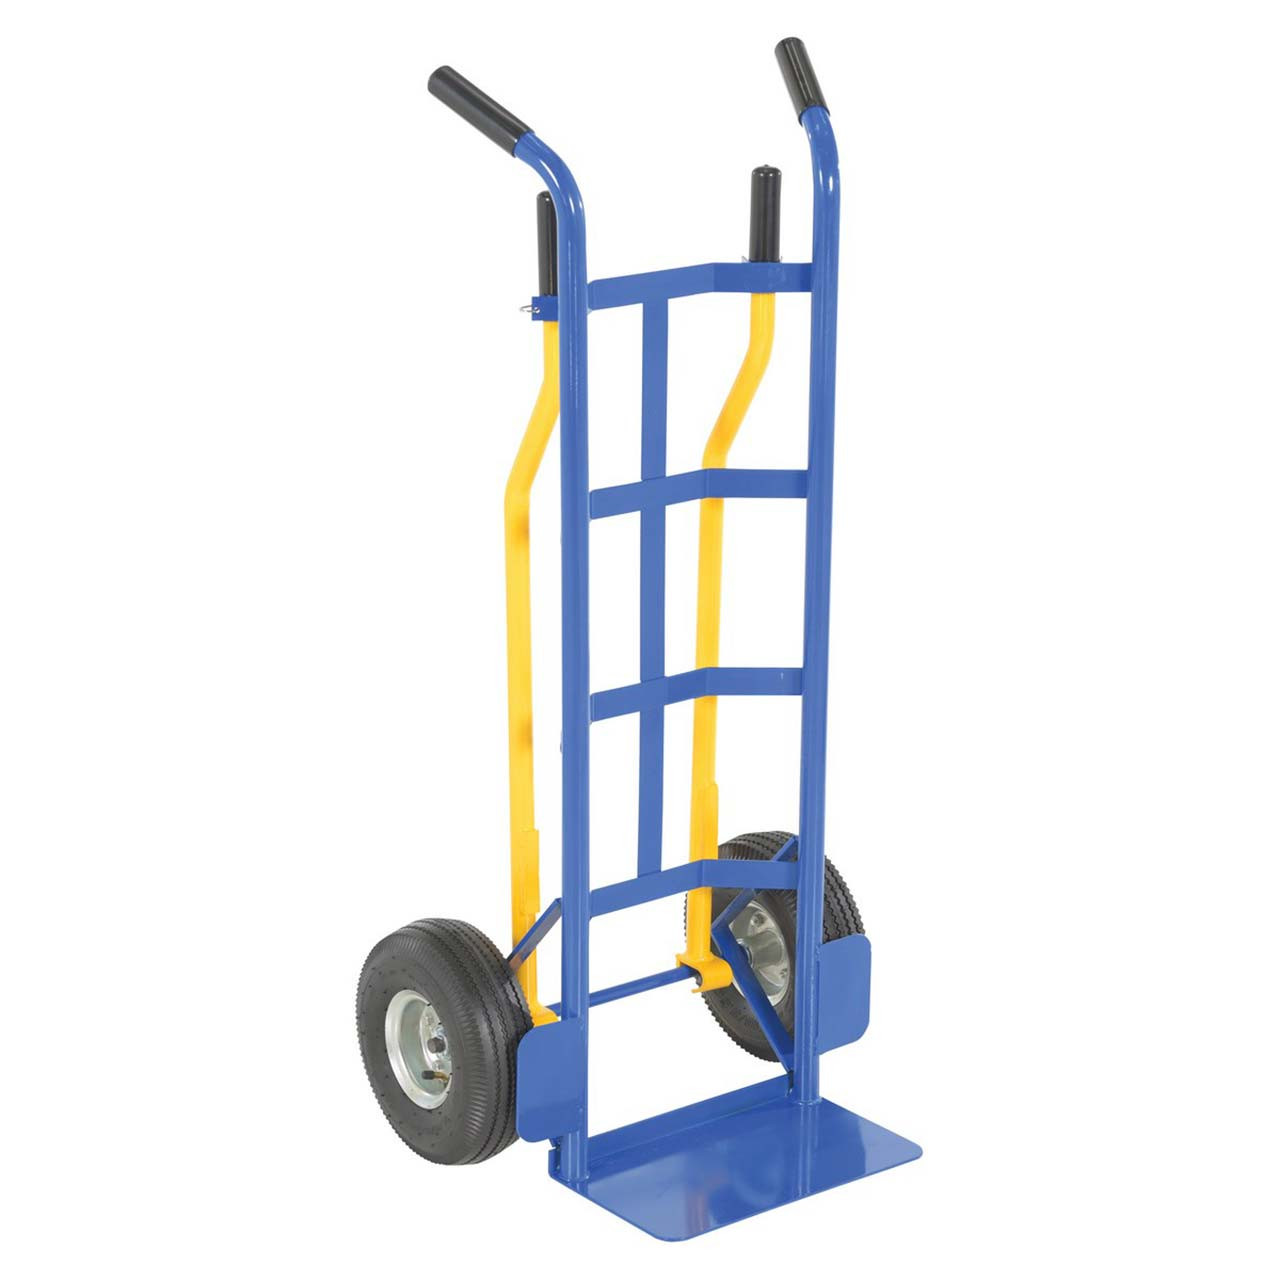 This multi-purpose dolly converts to two or four handles